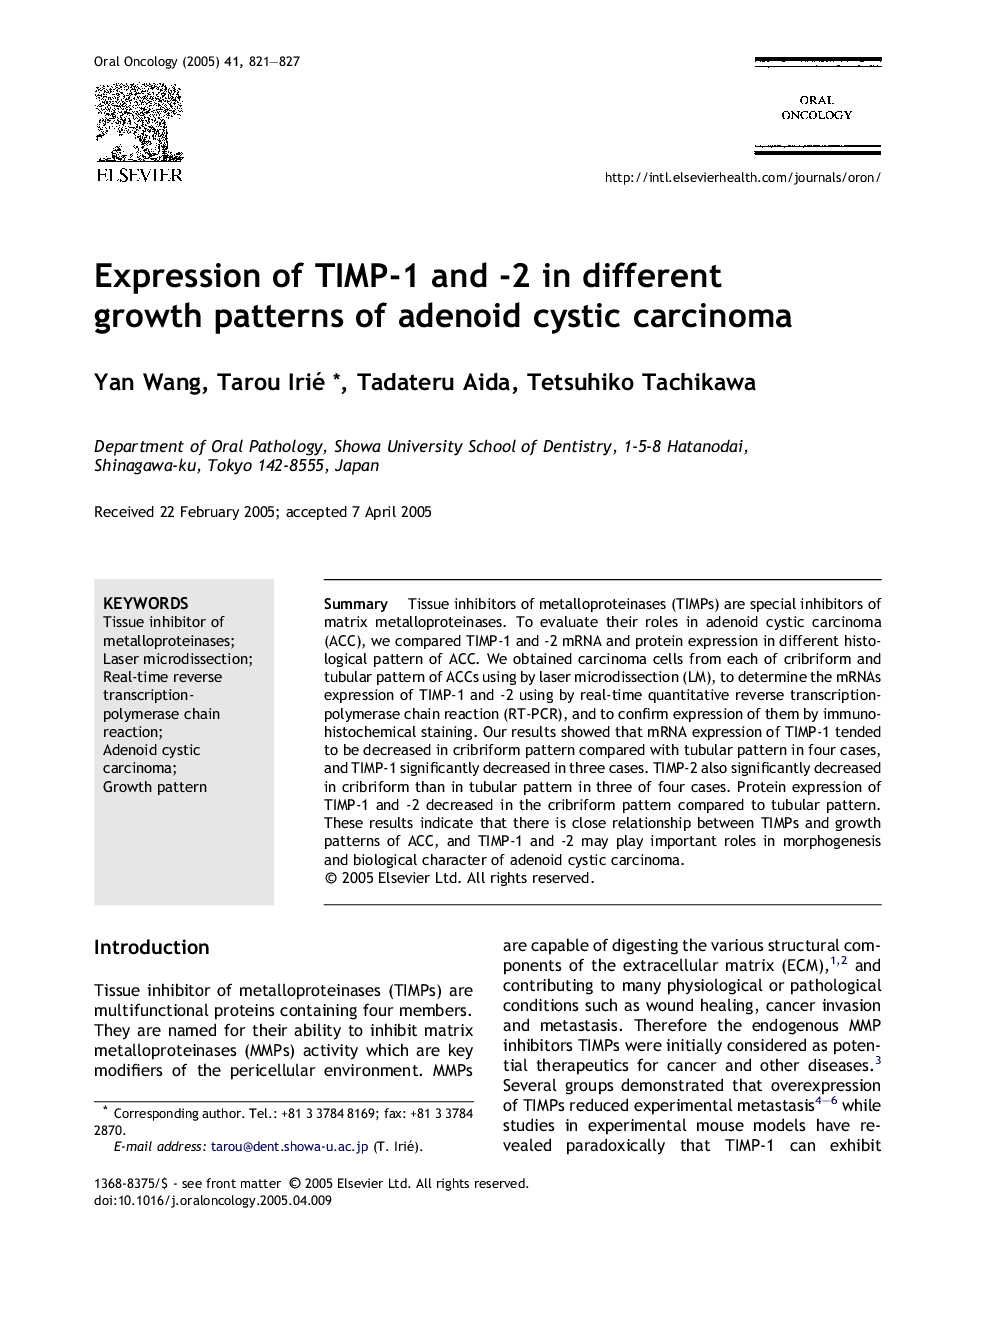 Expression of TIMP-1 and -2 in different growth patterns of adenoid cystic carcinoma